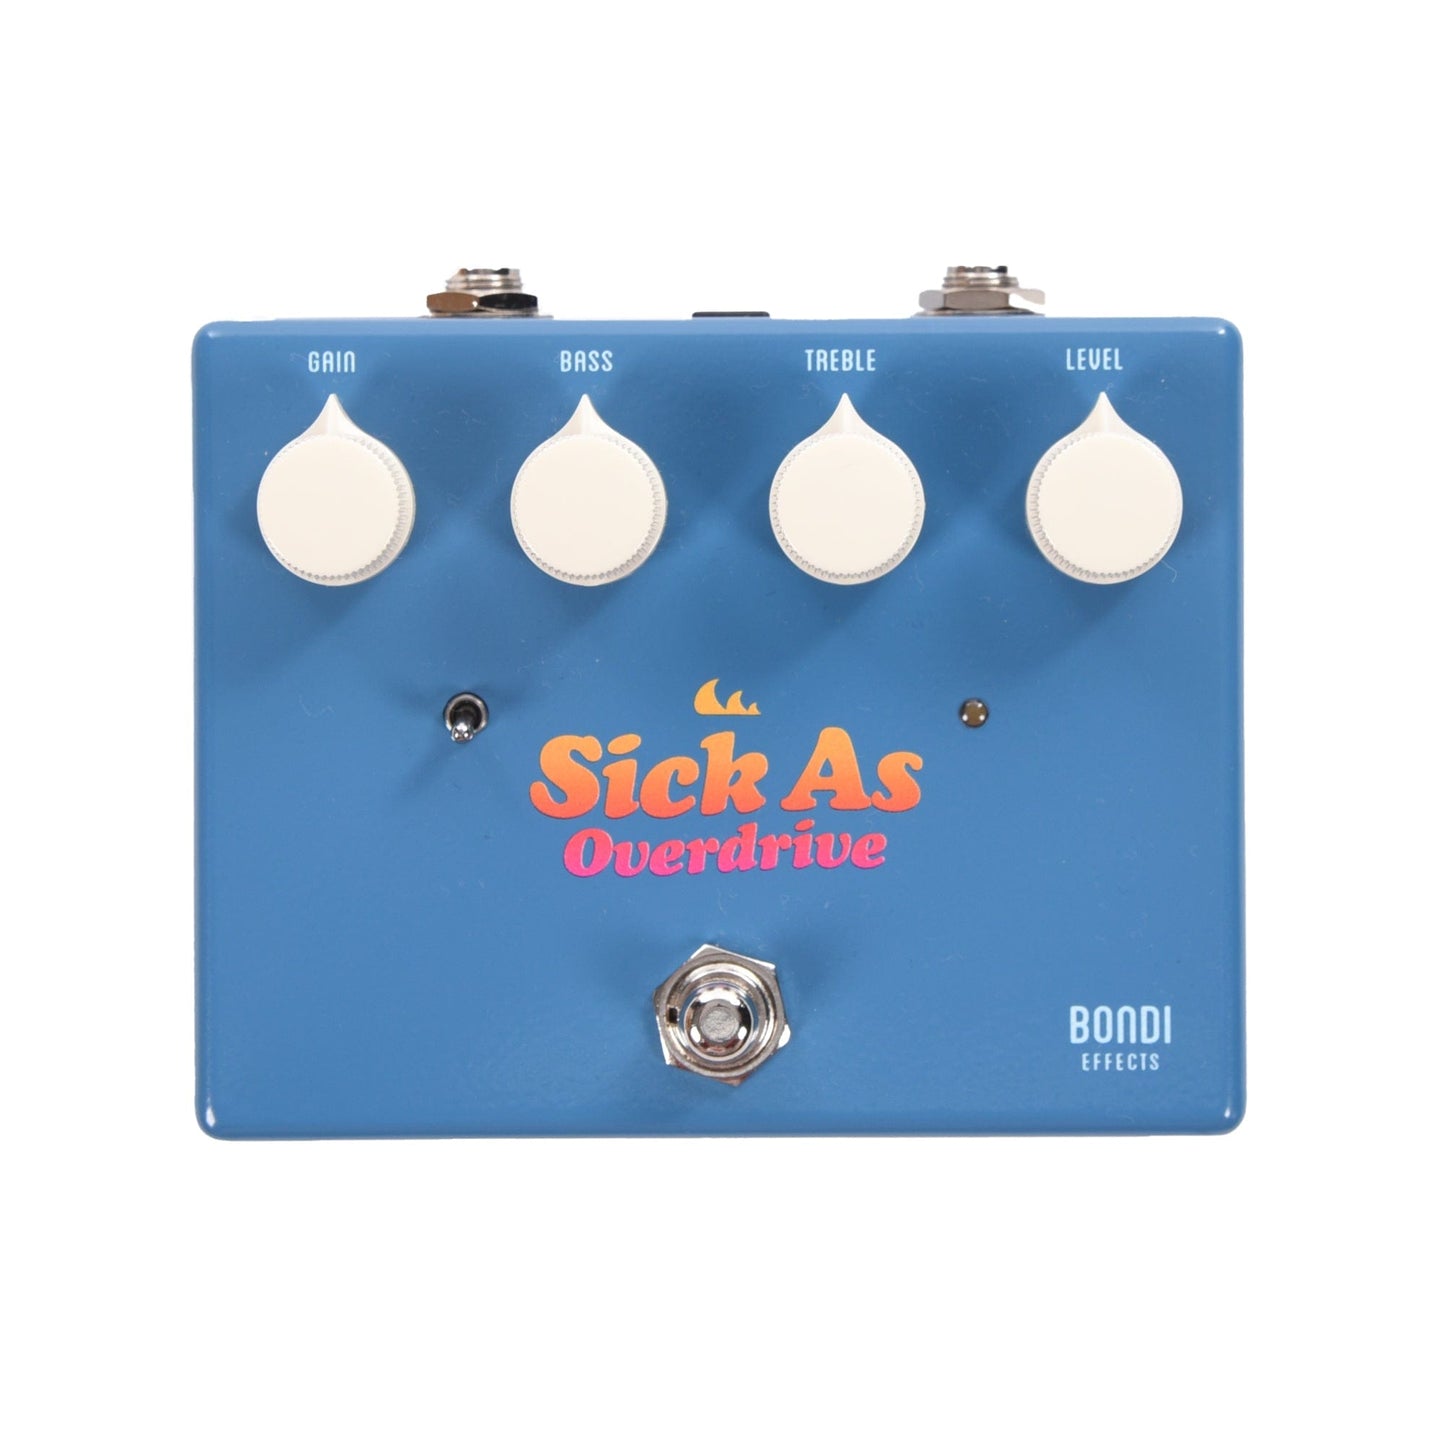 Bondi Effects Special Run Sick As Overdrive Pedal Retro Blue Effects and Pedals / Overdrive and Boost